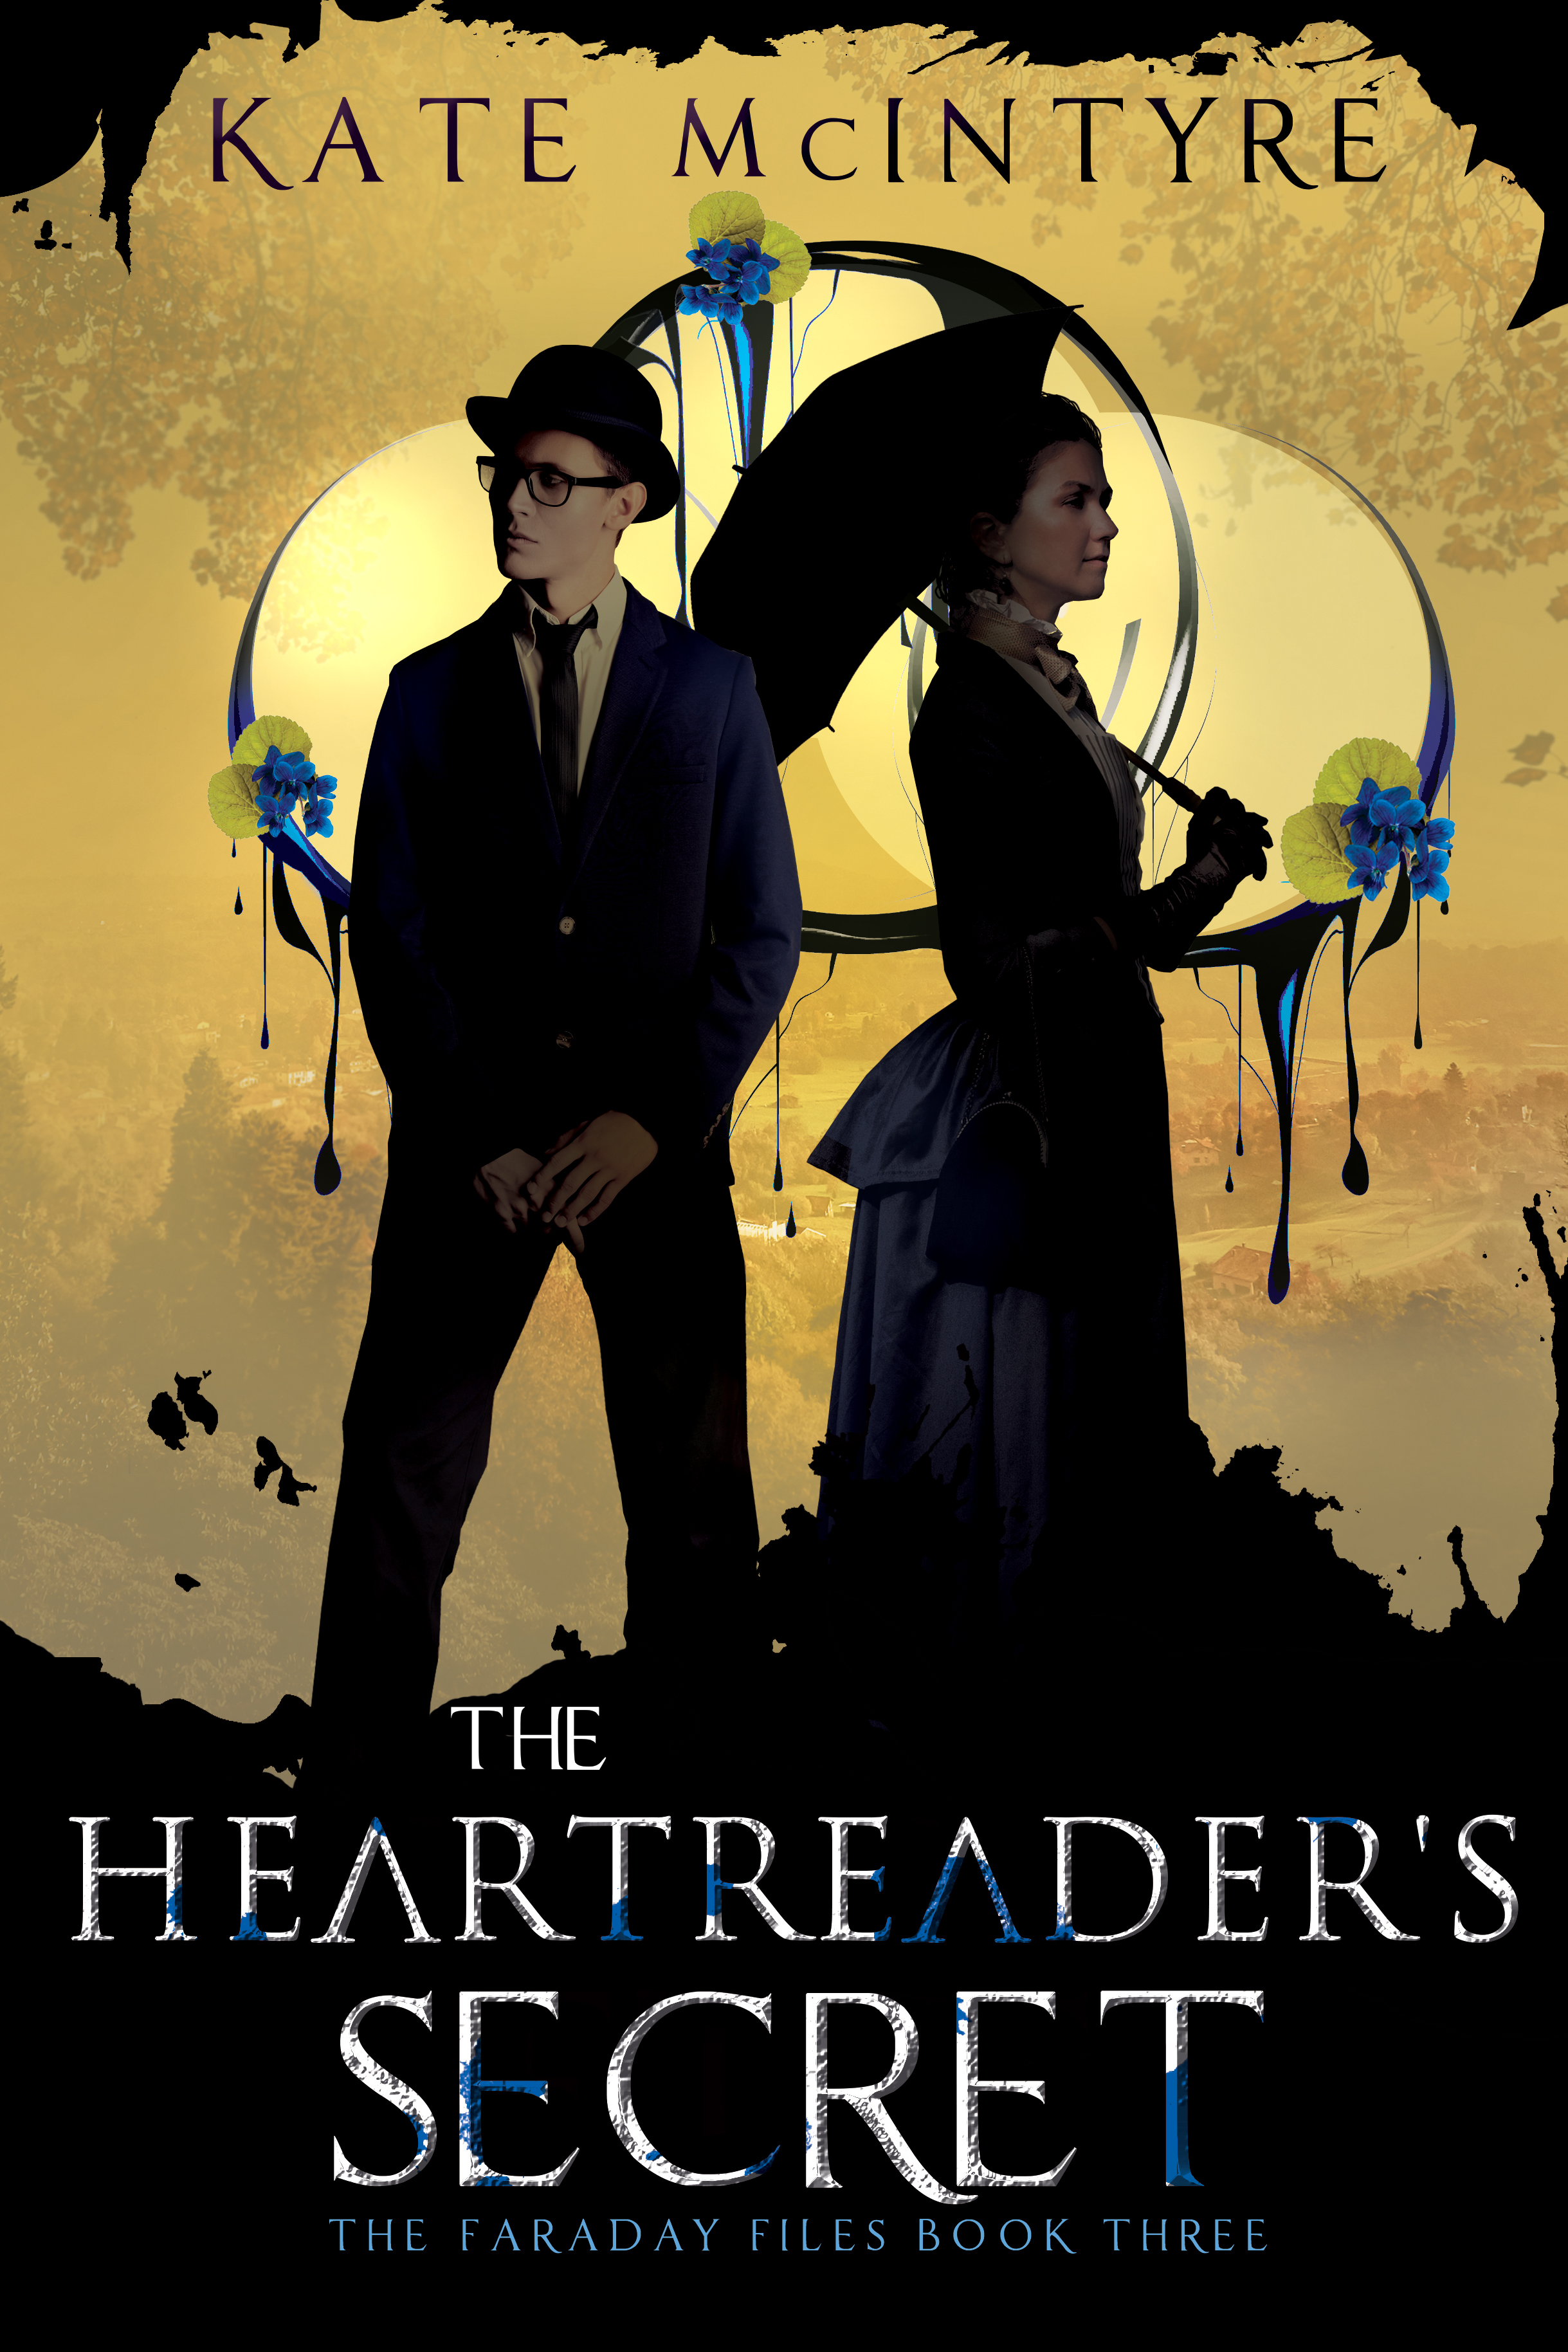 3 The Heartreader's Secret final front cover final